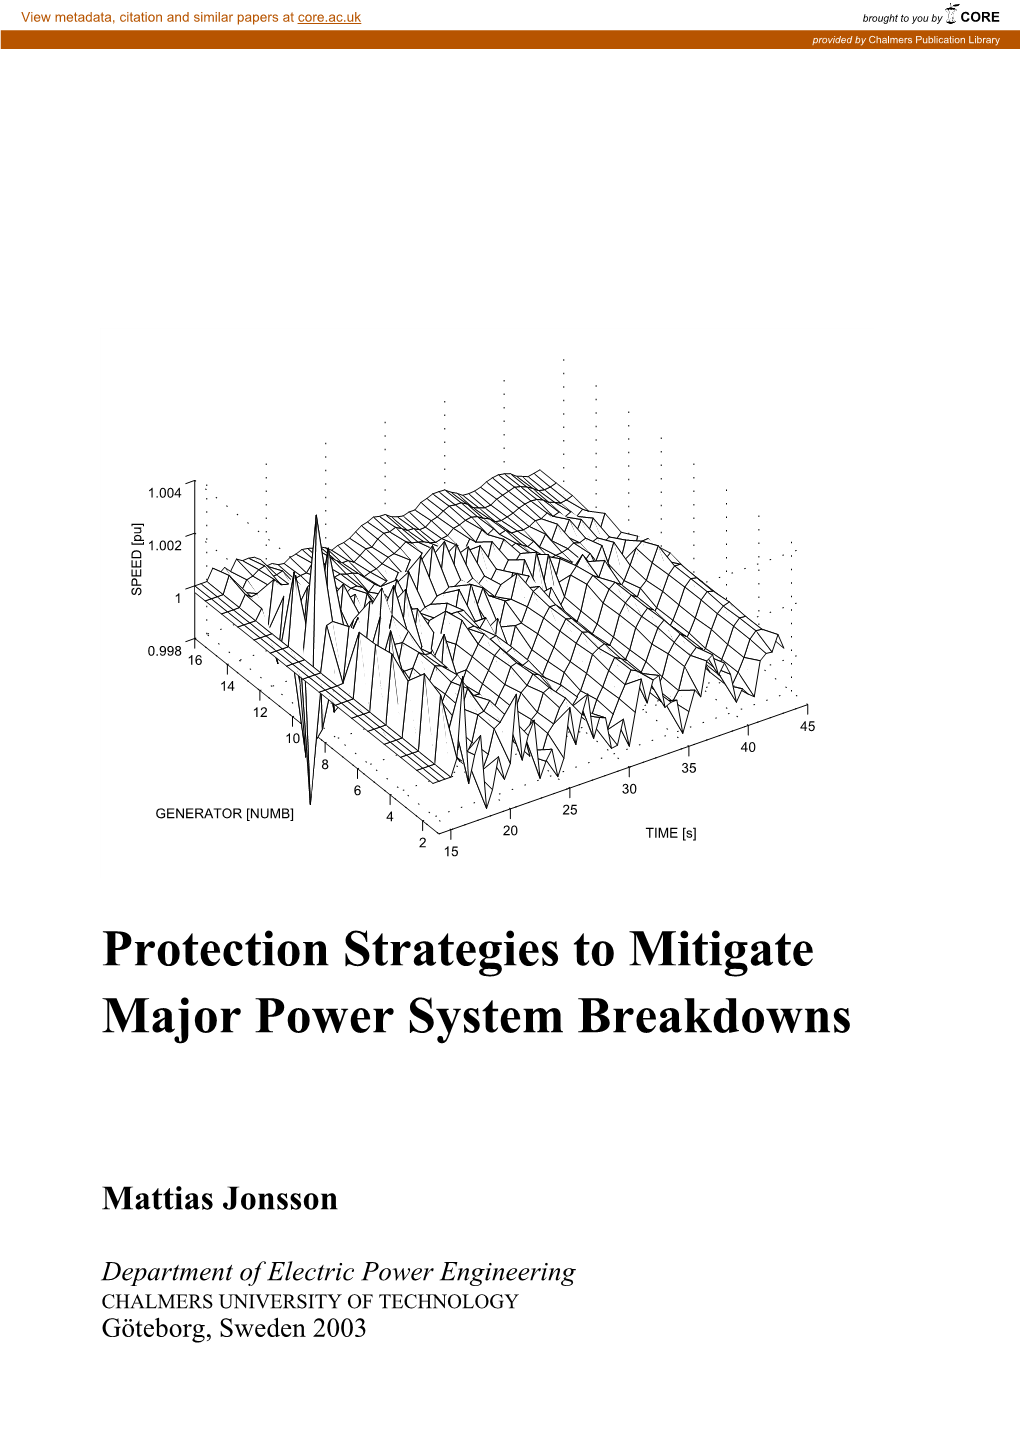 Protection Strategies to Mitigate Major Power System Breakdowns